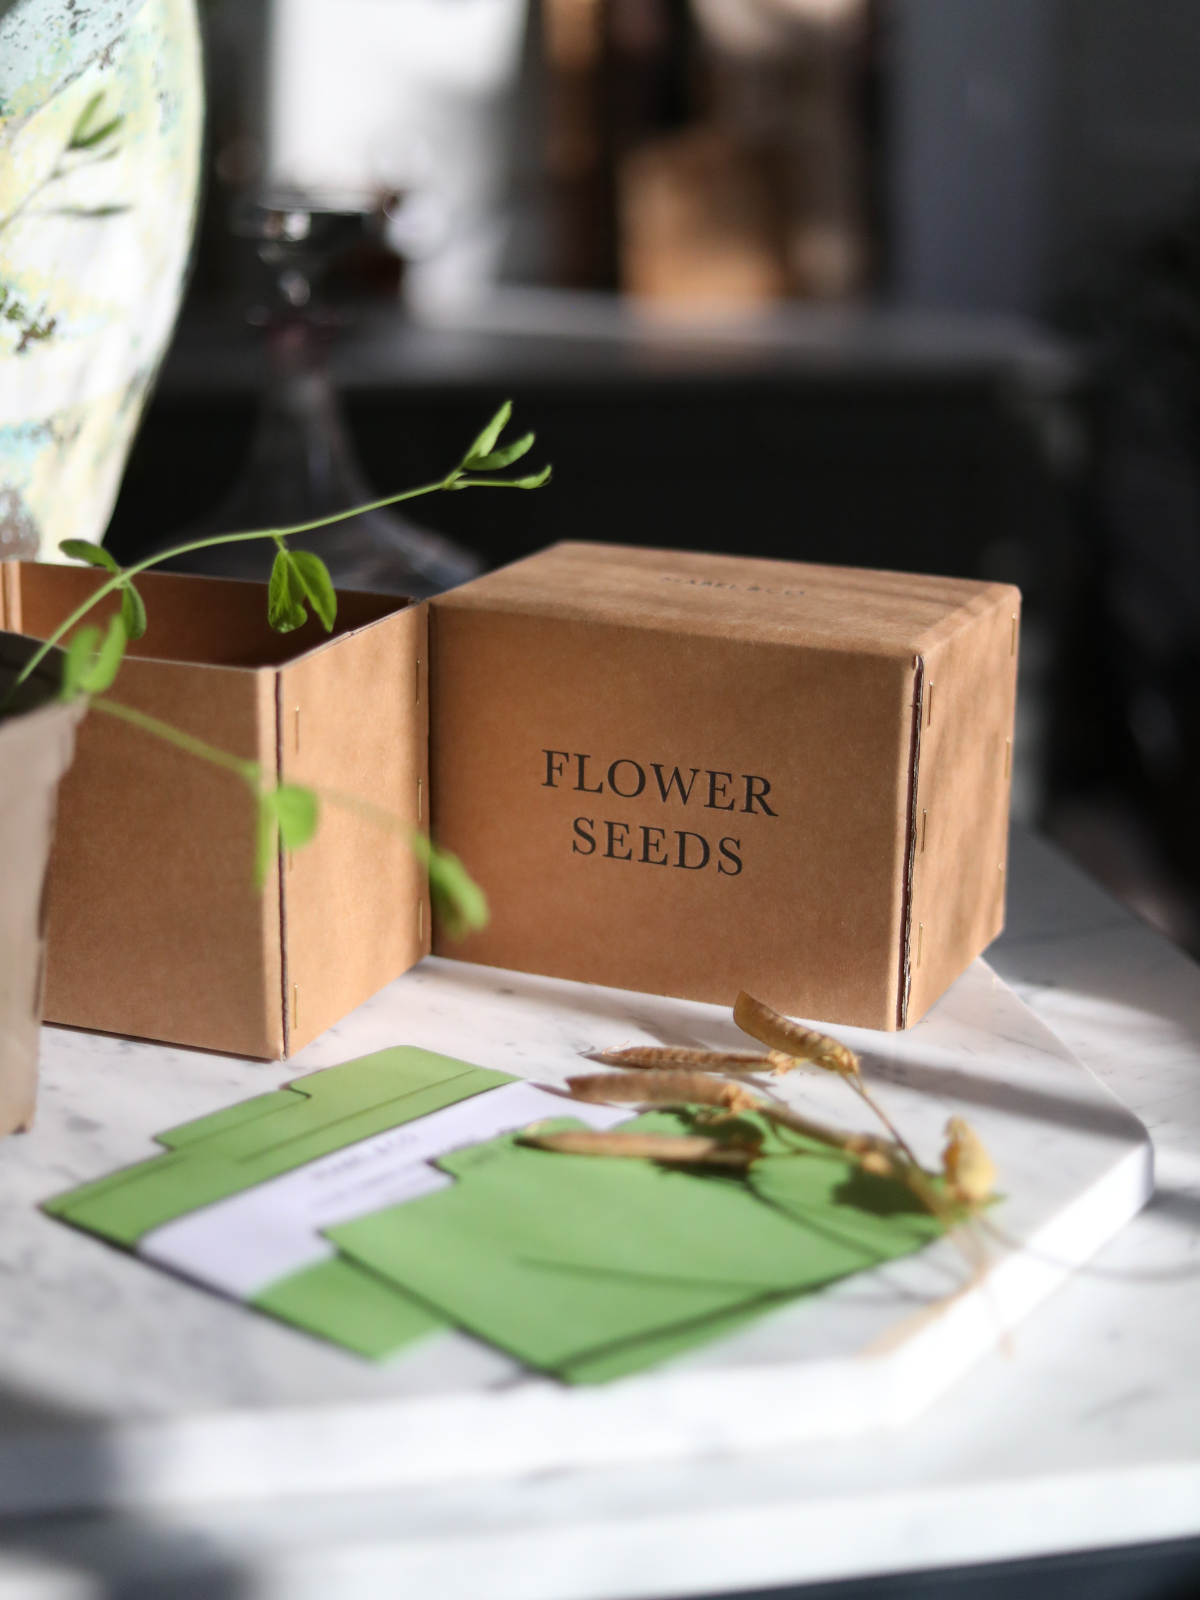 Flower seeds in a box